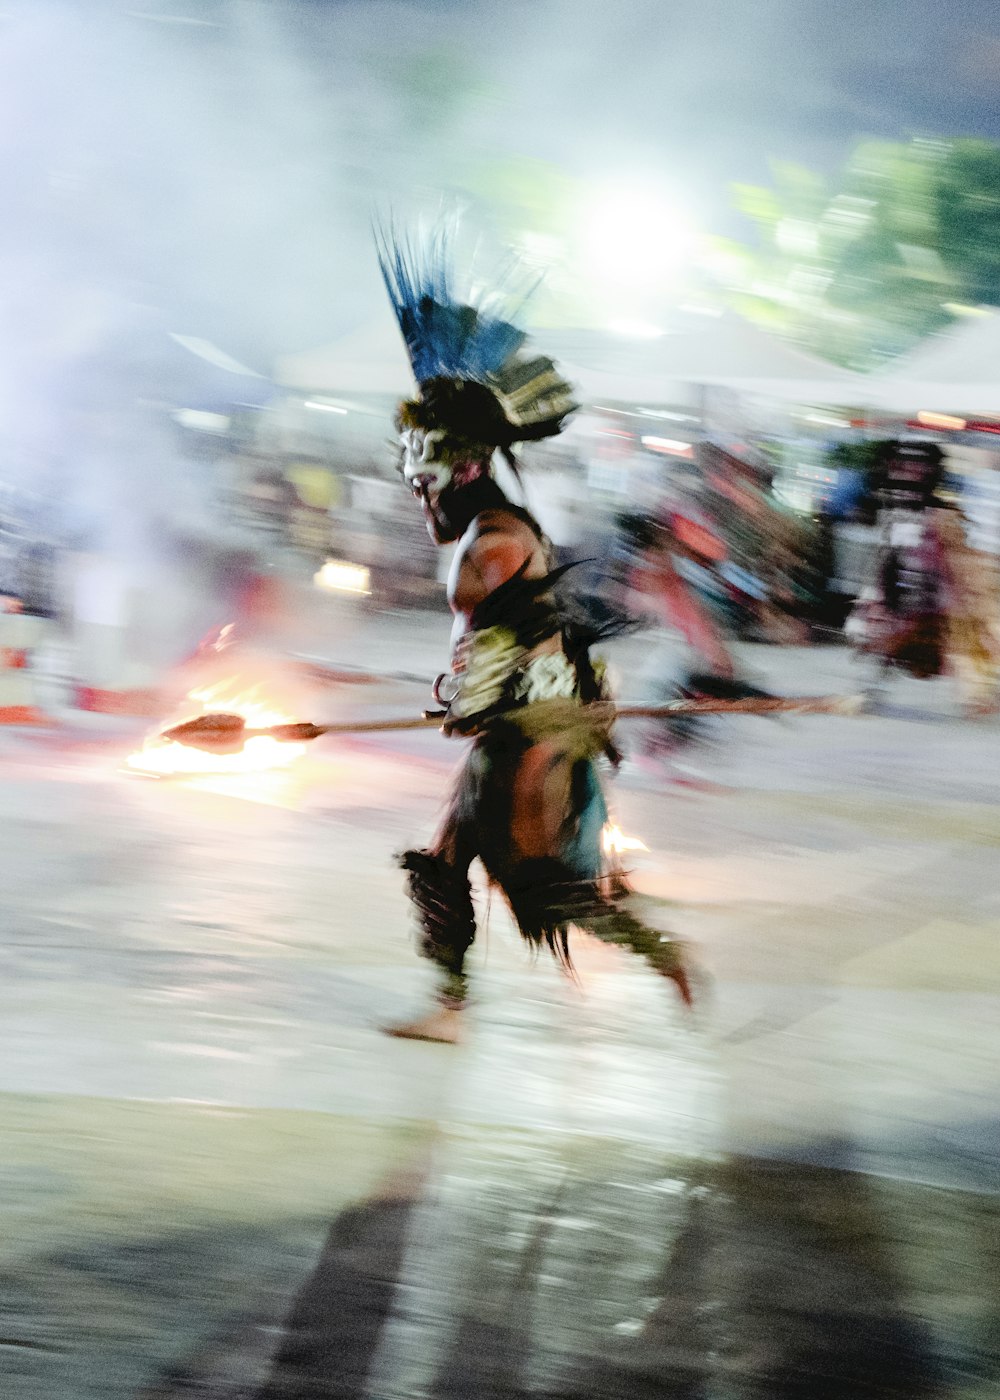 a man dressed in native american clothing running across a street